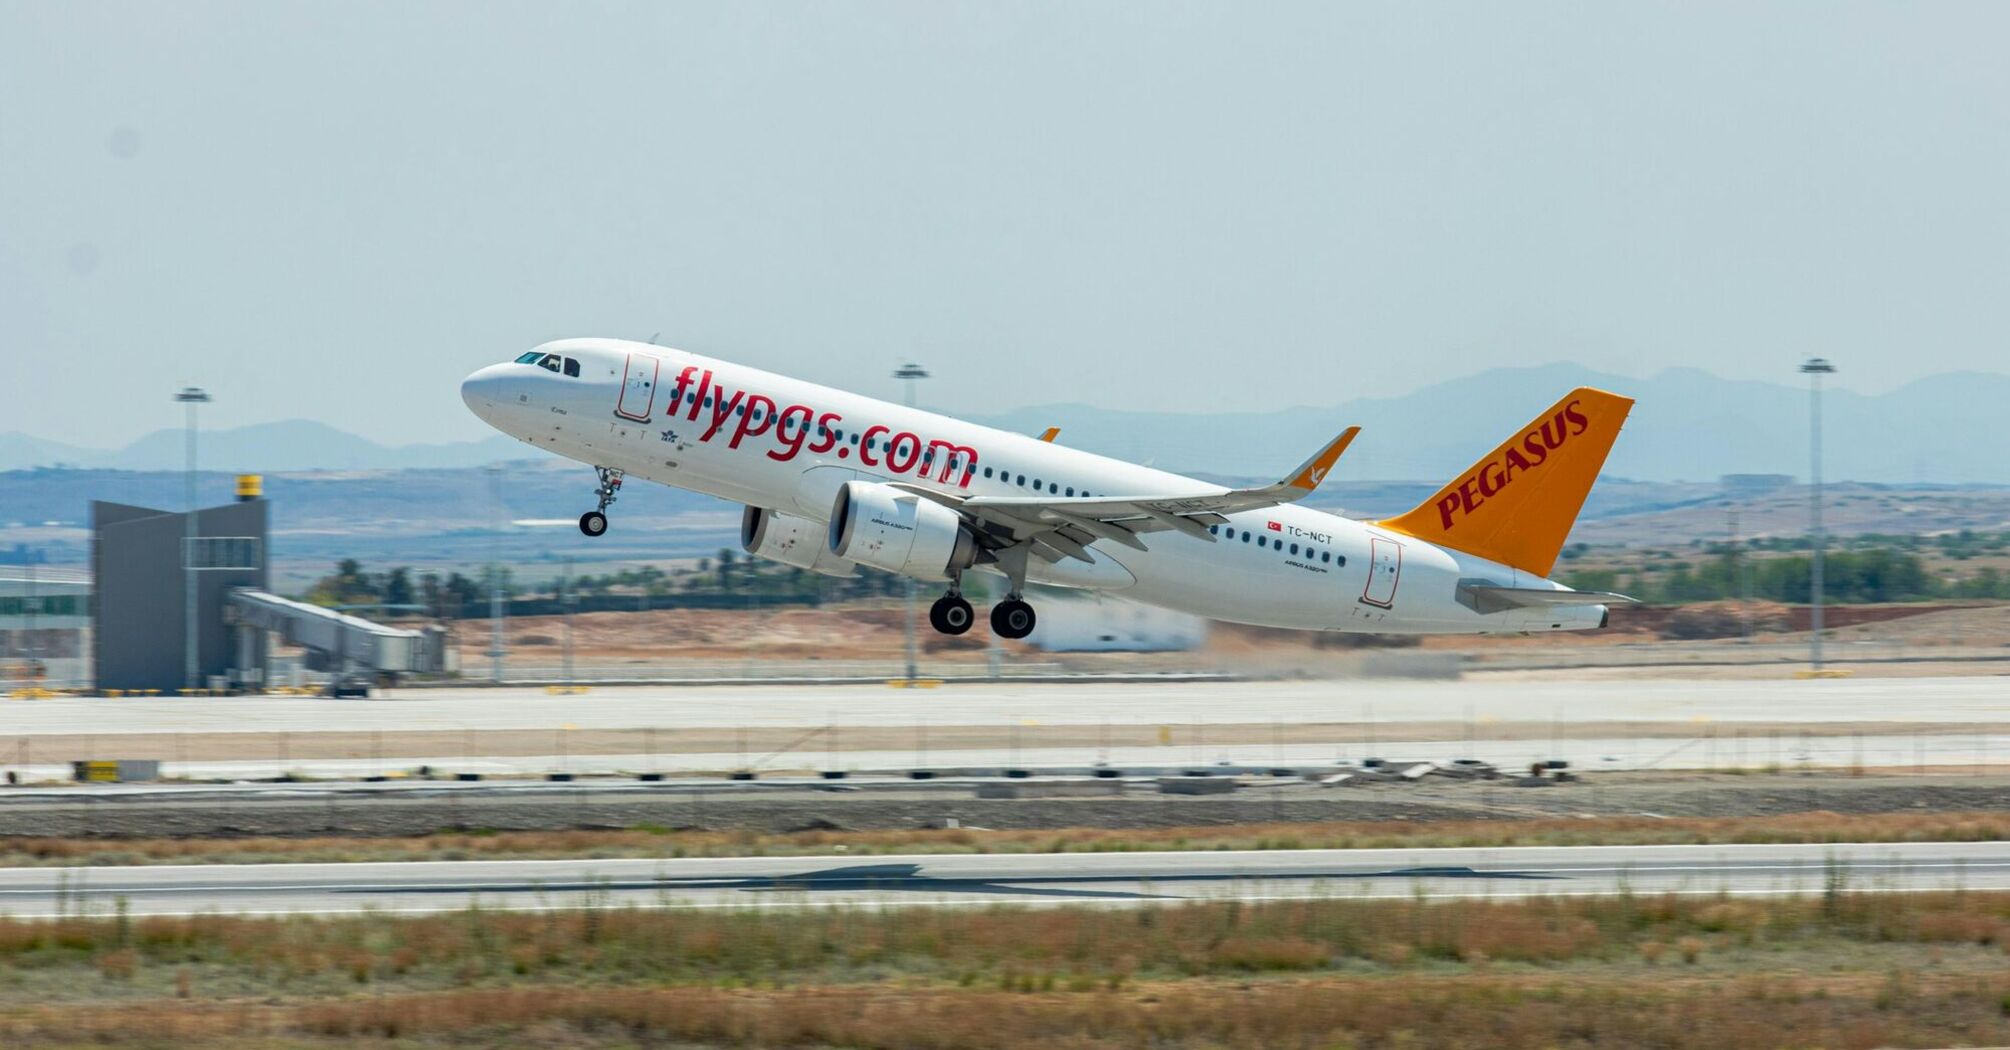 Pegasus Airlines aircraft taking off on a sunny day, showcasing the vibrant branding and colors of the airline